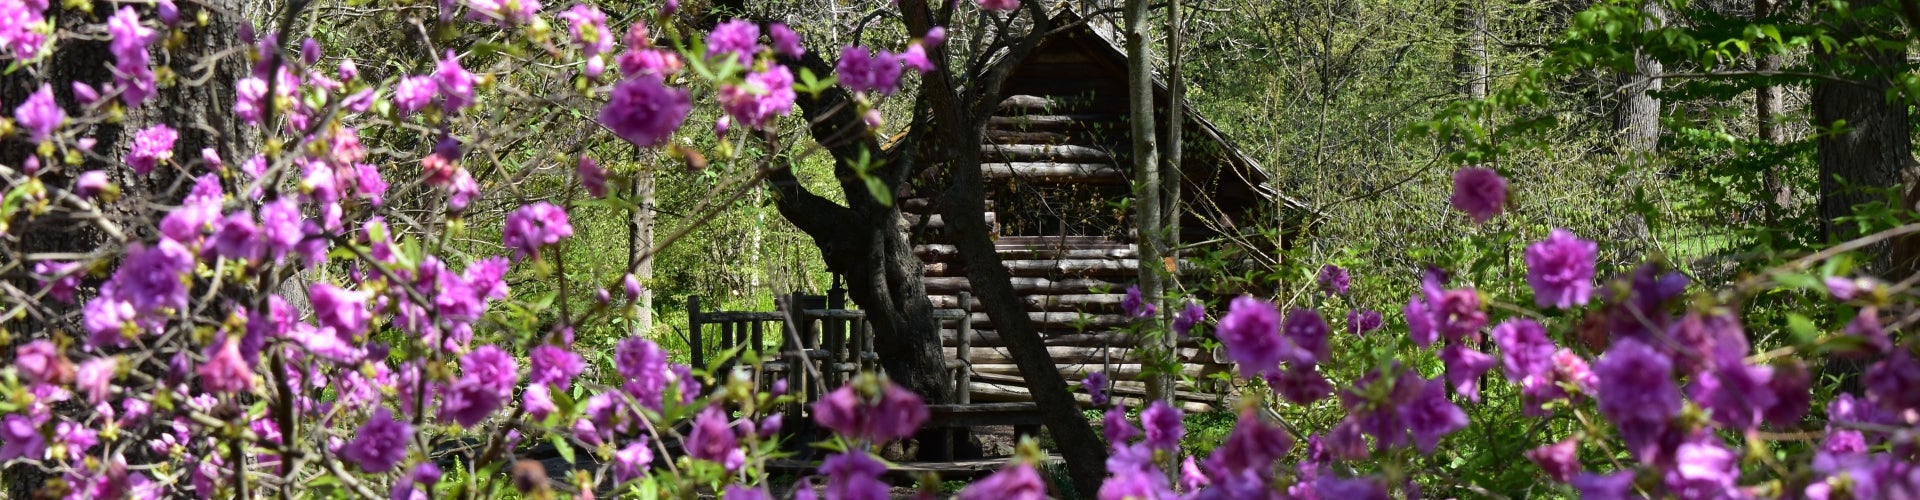 A log cabin surrounded by pink azaleas in bloom. 